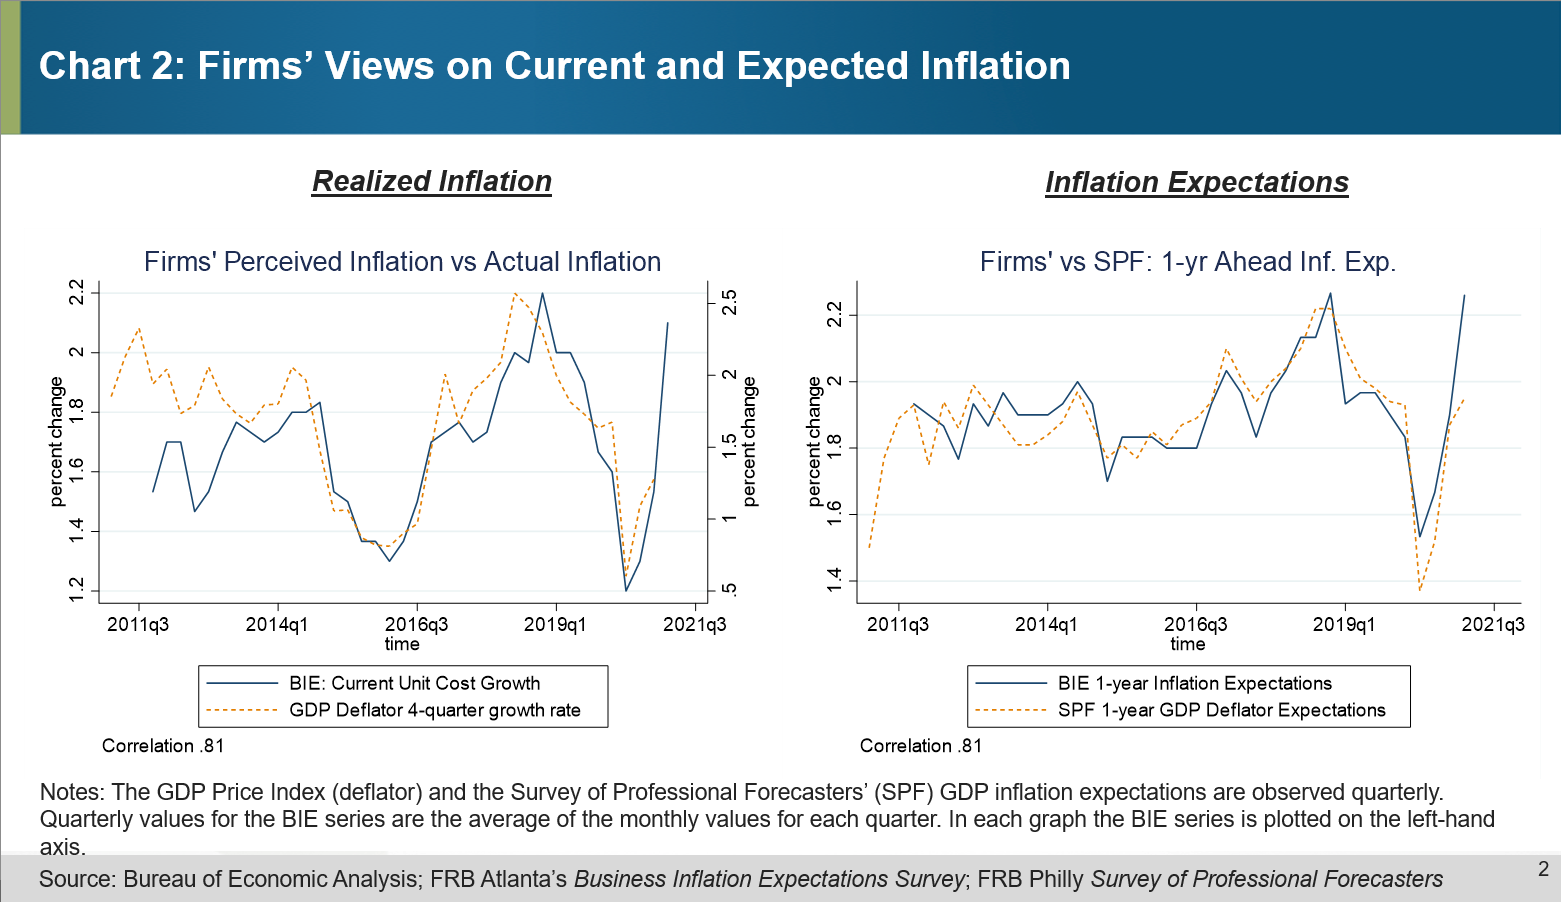 Chart 2 of 4: Firms' Views on Current and Expected Inflation